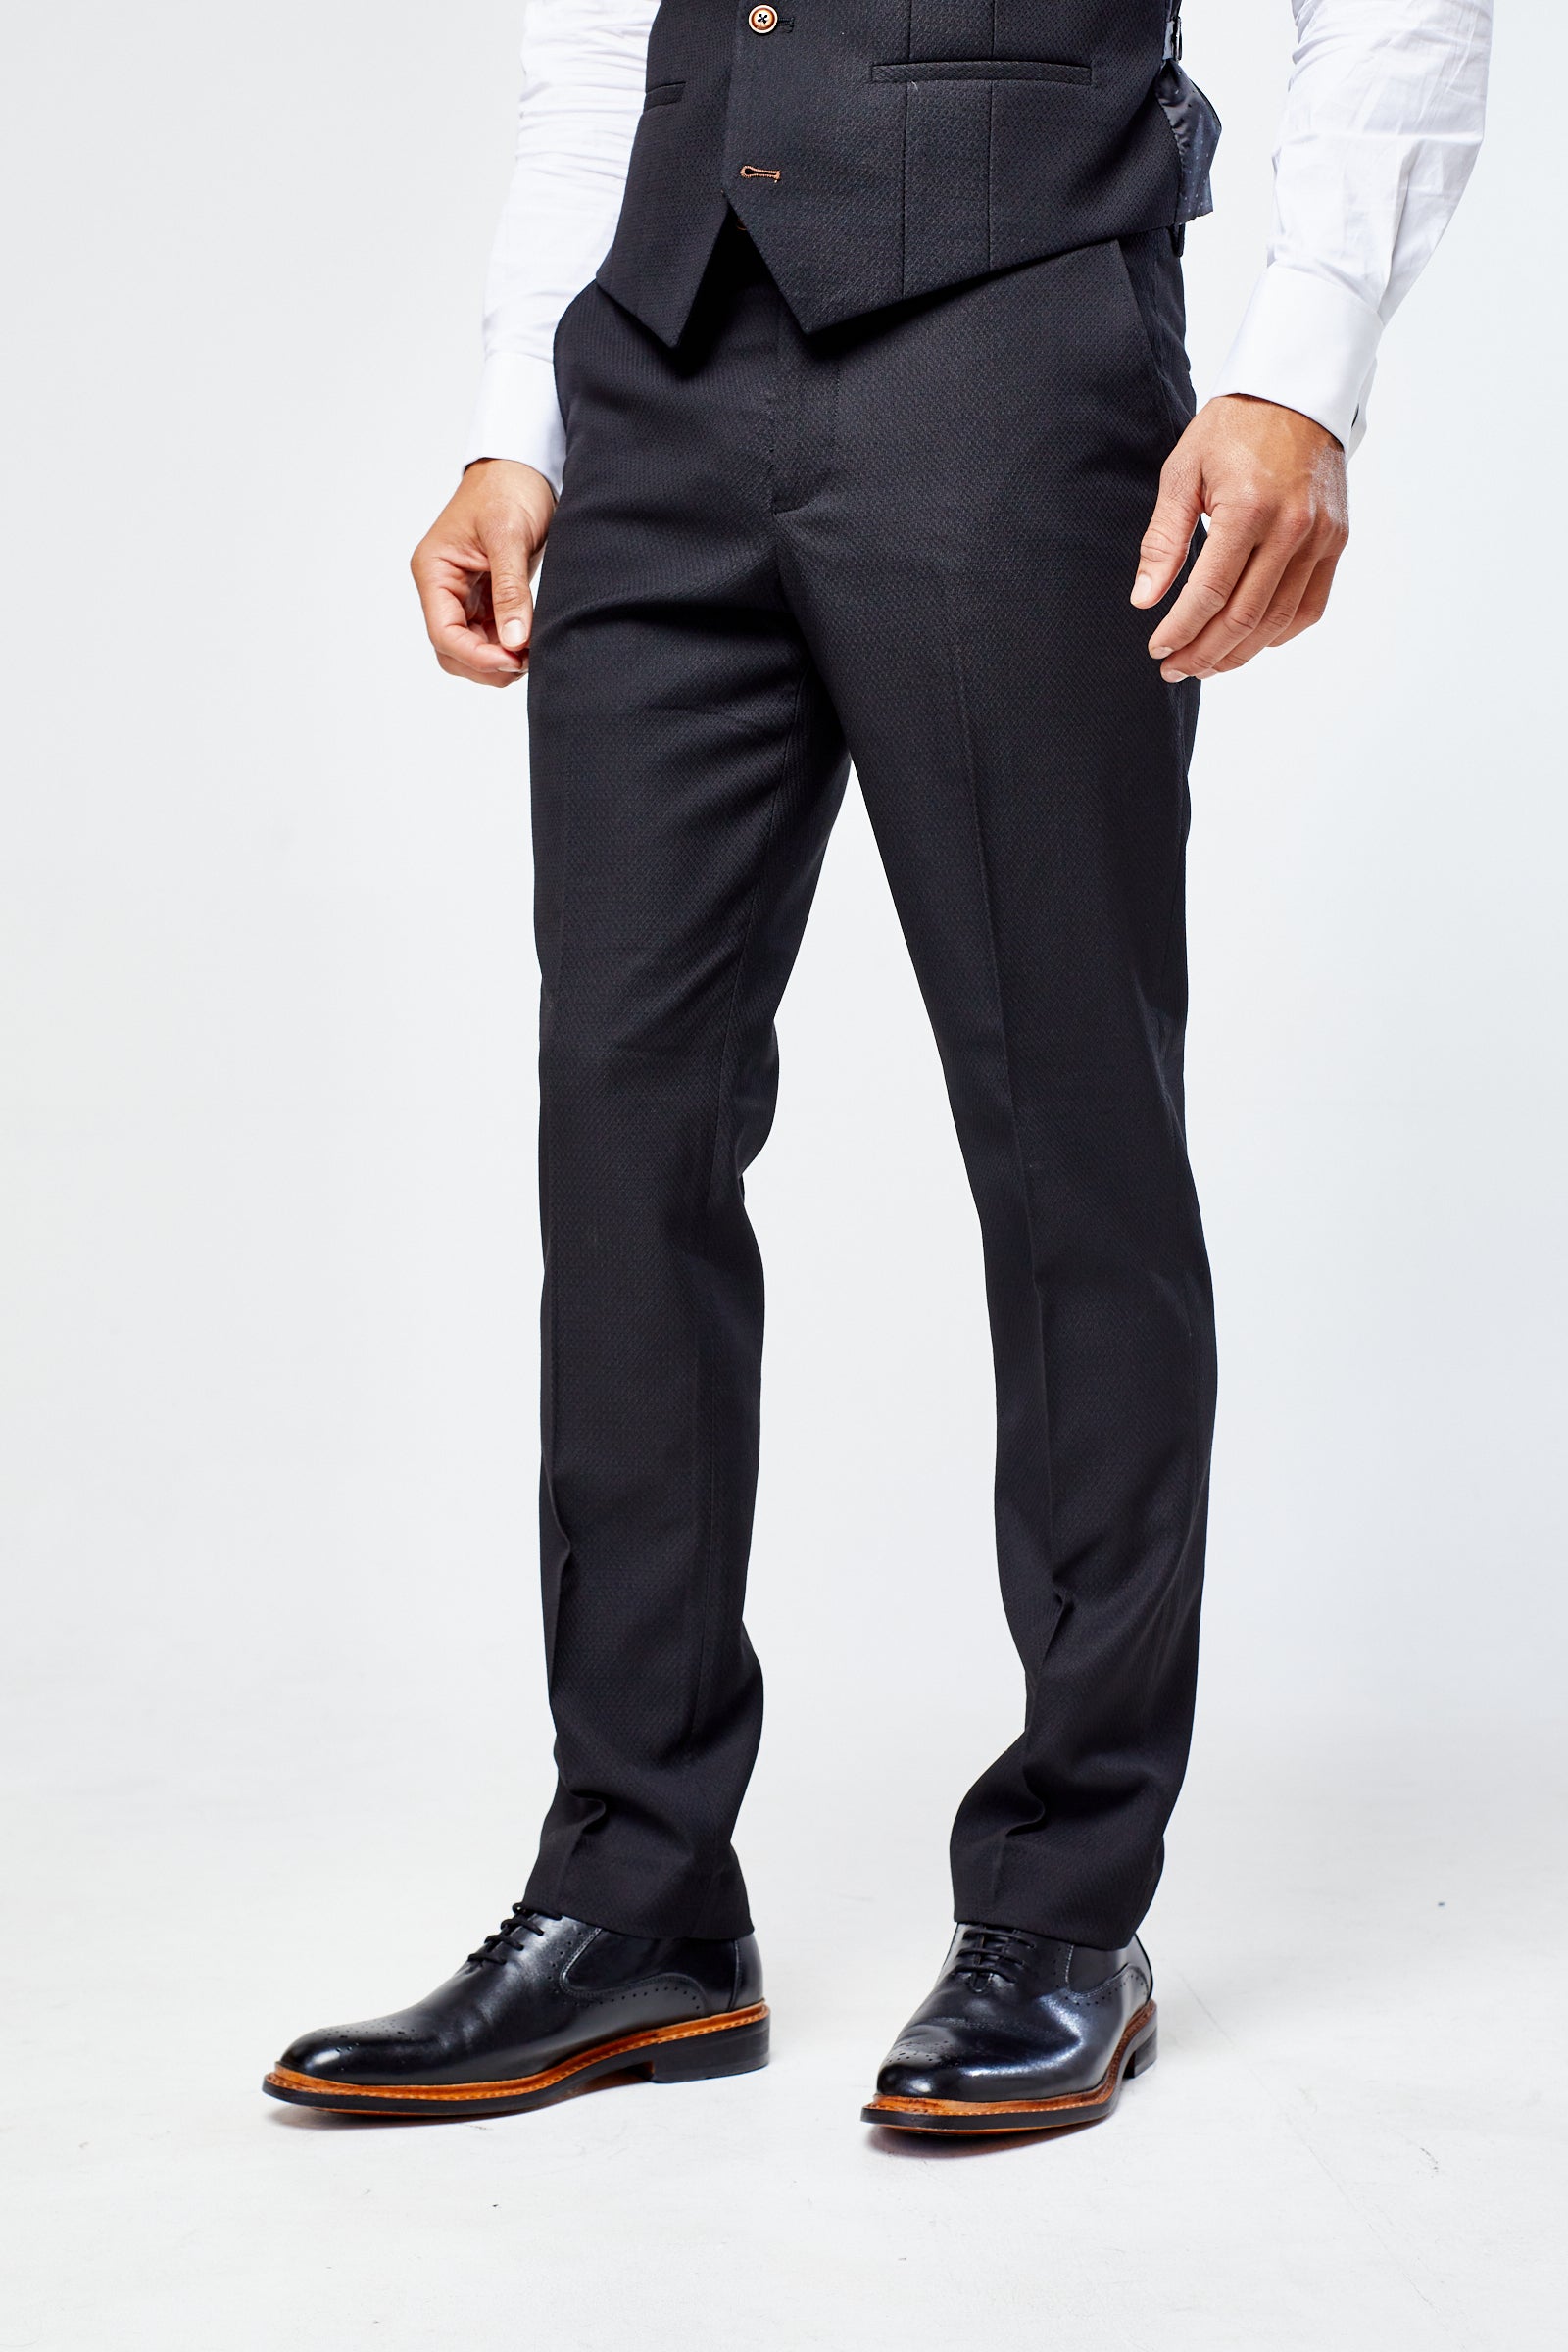 Max - Black Three Piece Suit with Contrast Buttons